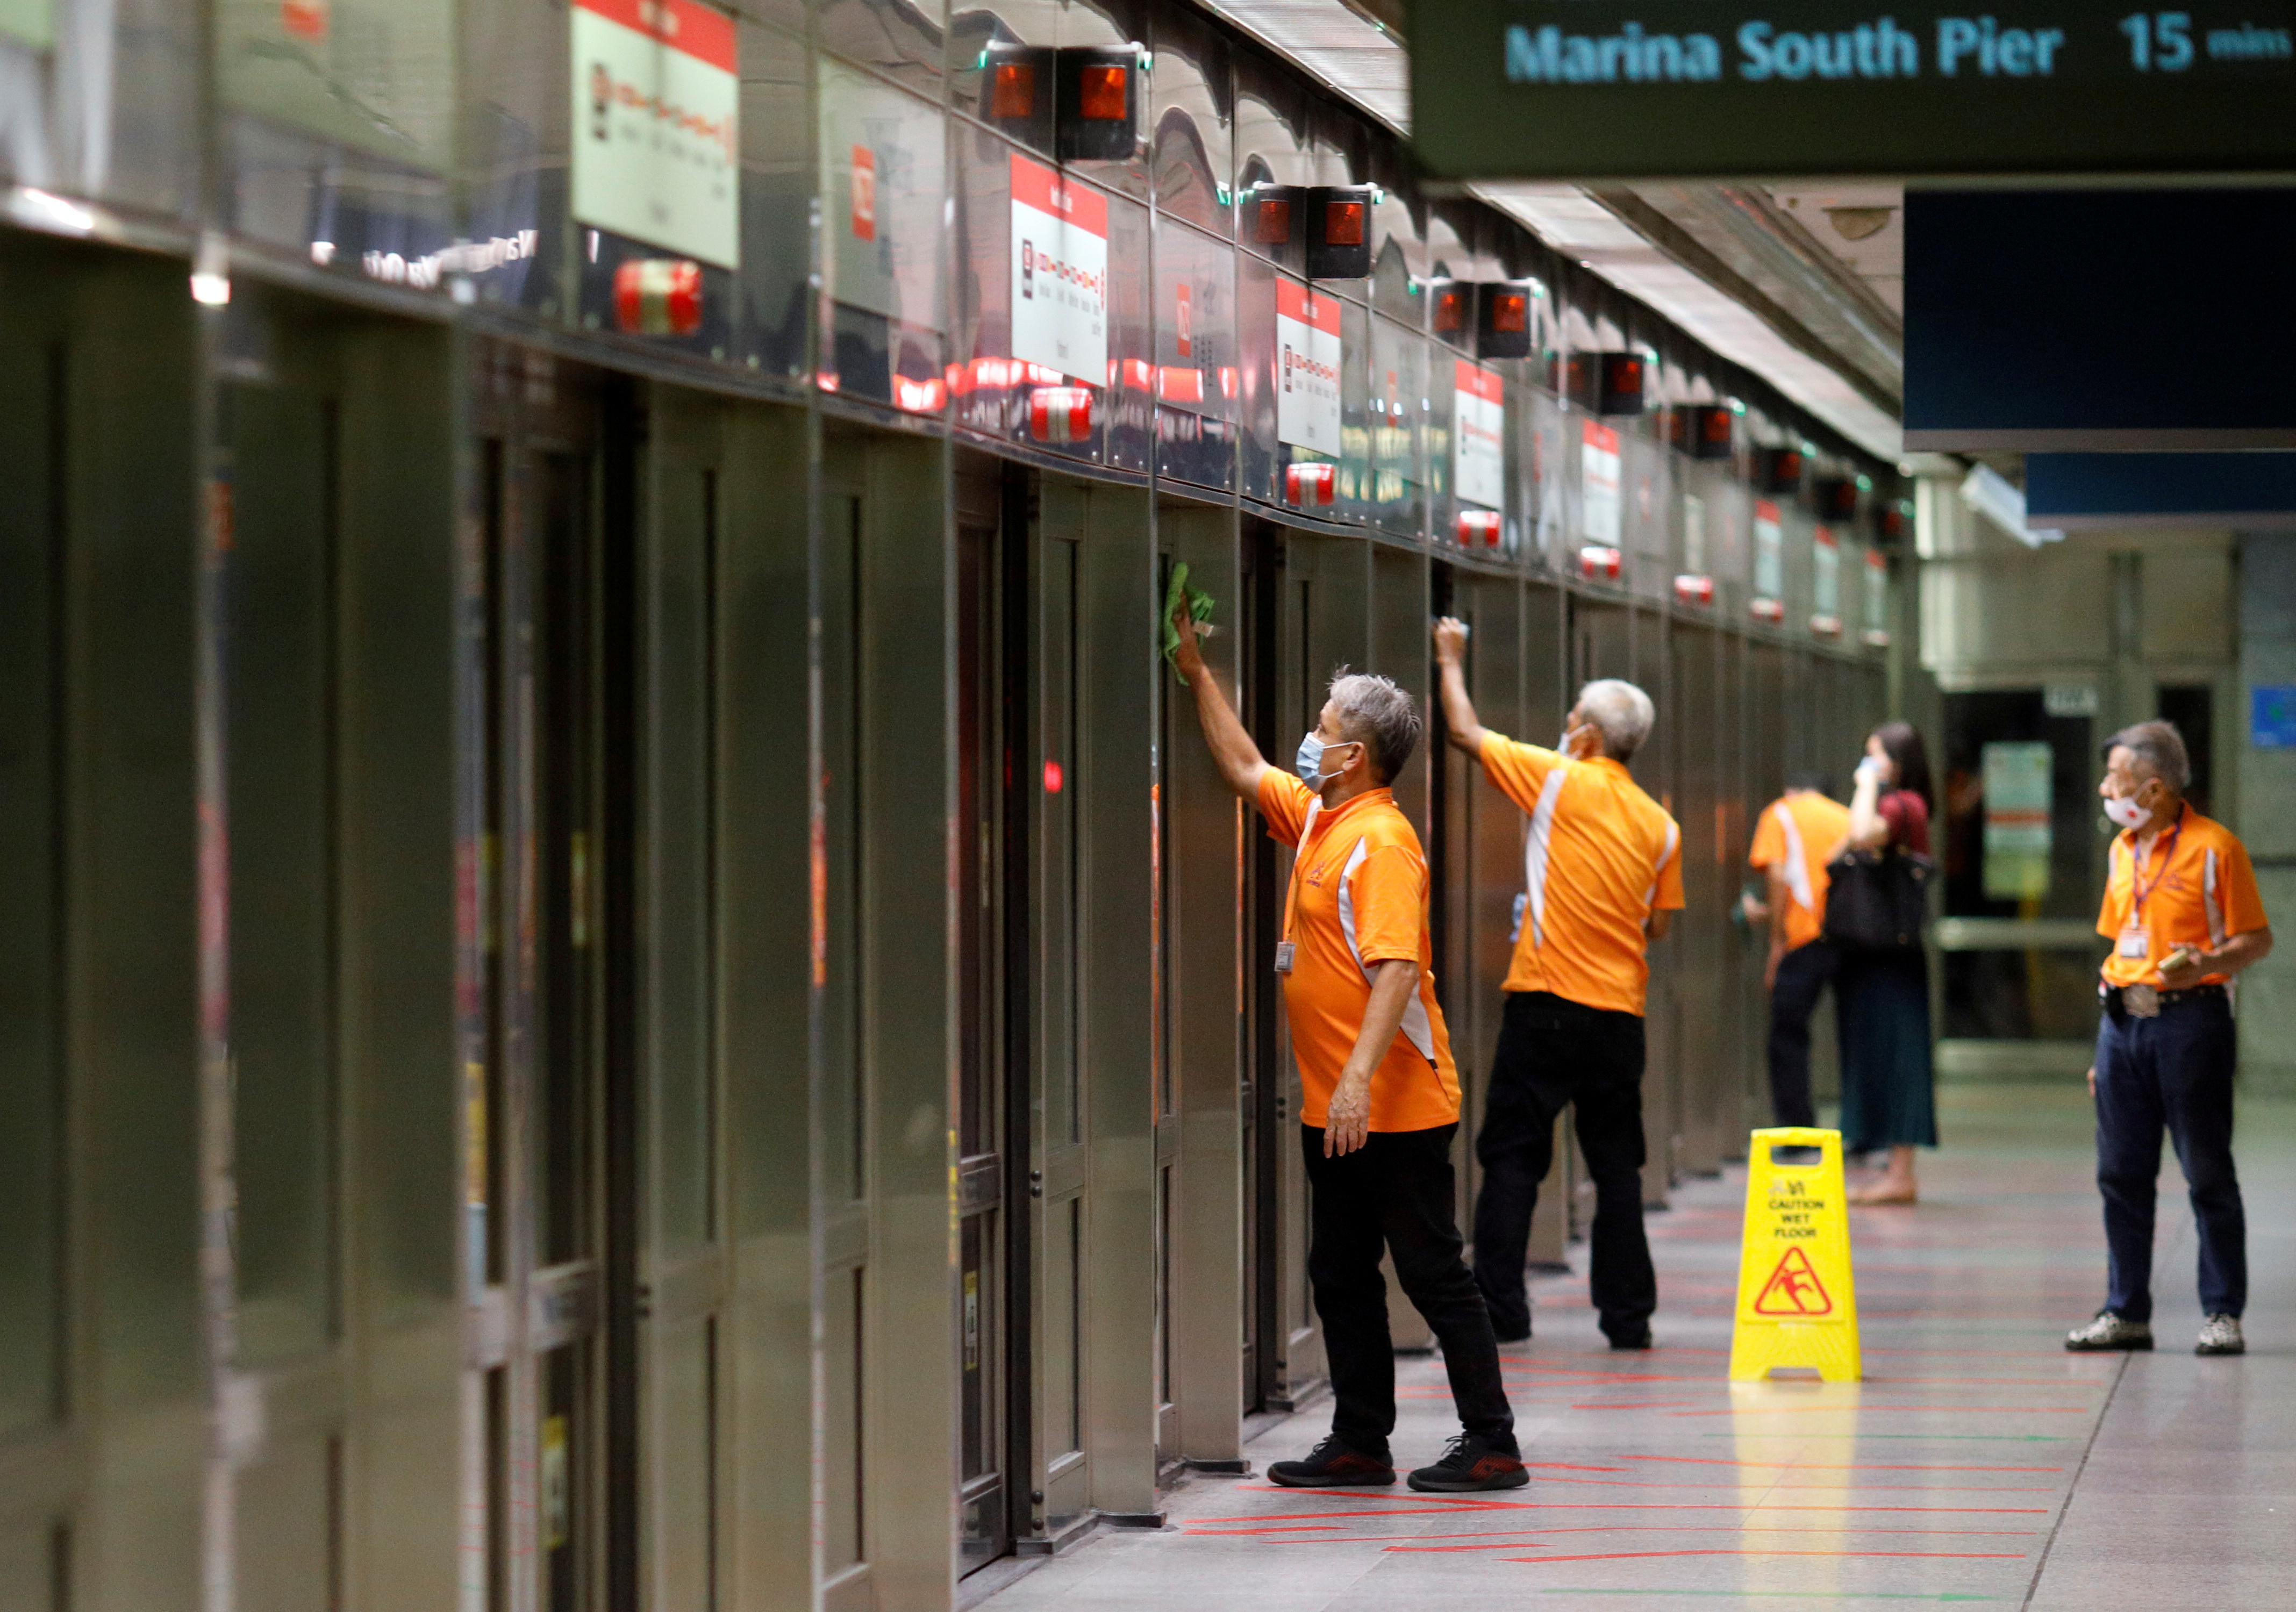 Workers wipe down doors at a train station during the coronavirus disease (COVID-19) outbreak in Singapore